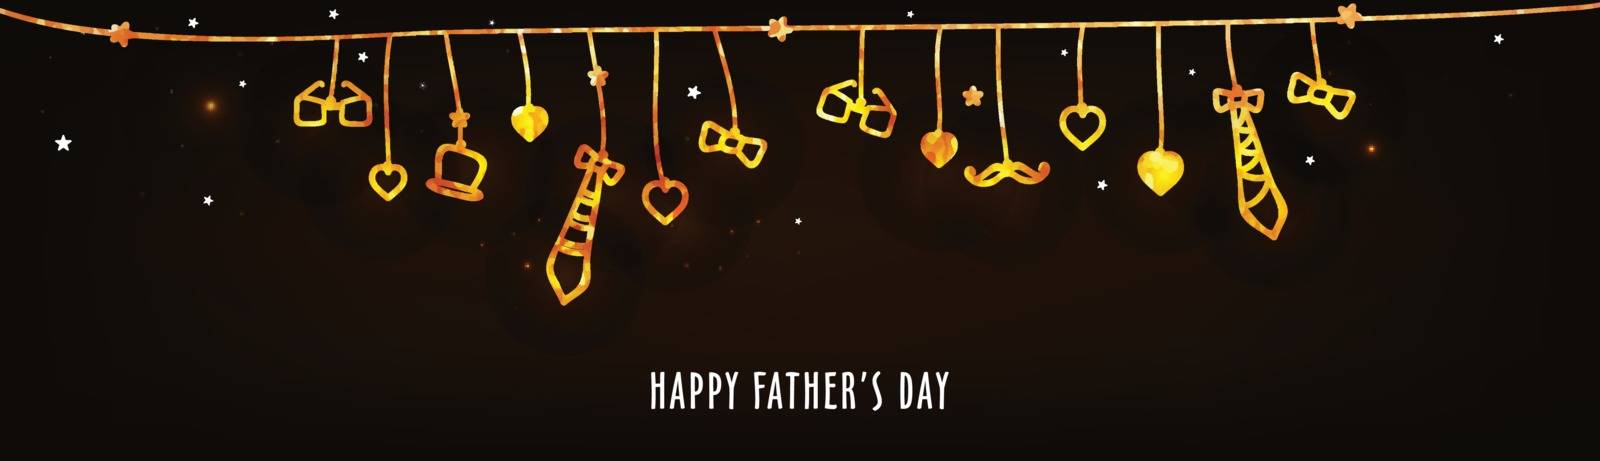 Father's Day banner with hand drawn elements. by aispl